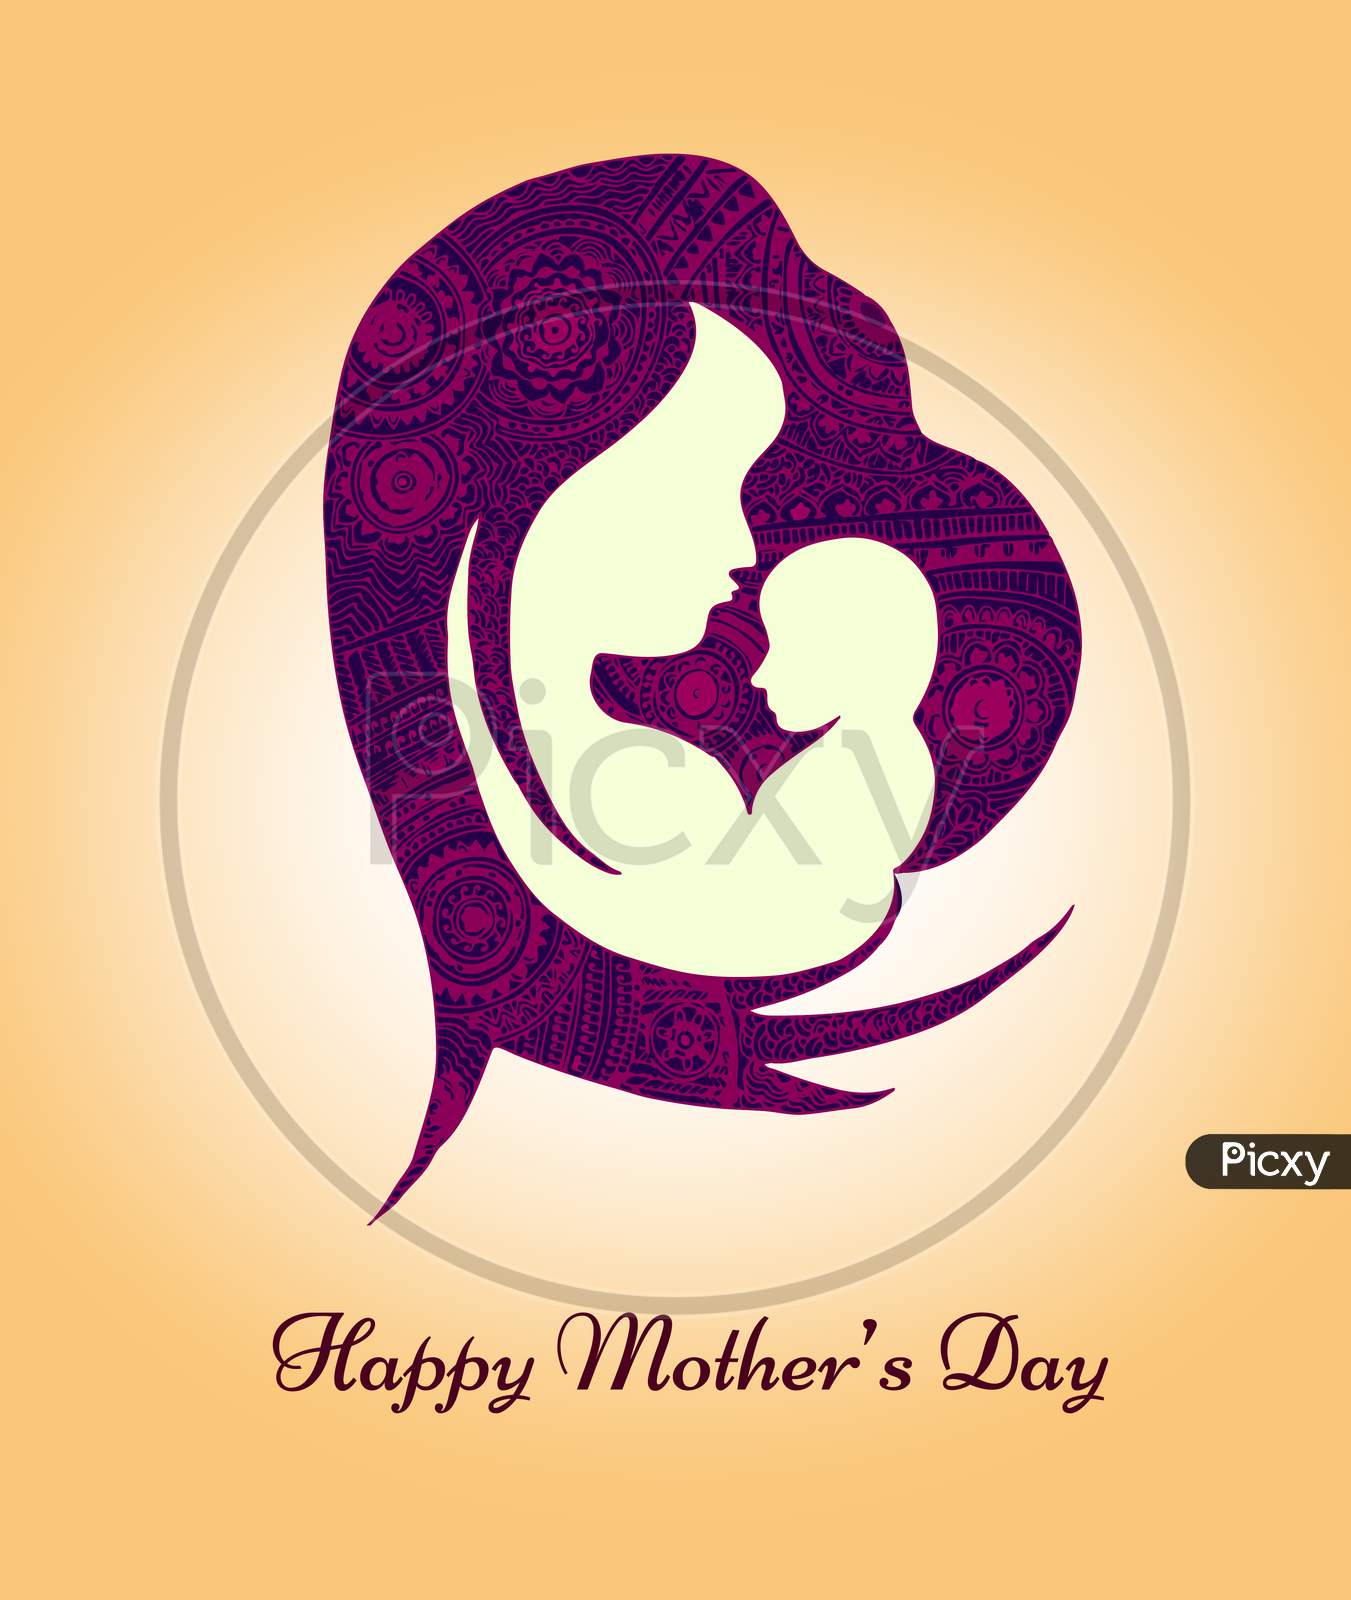 Happy mothers day greeting card template, stylized symbol of mom and baby mandala art concept